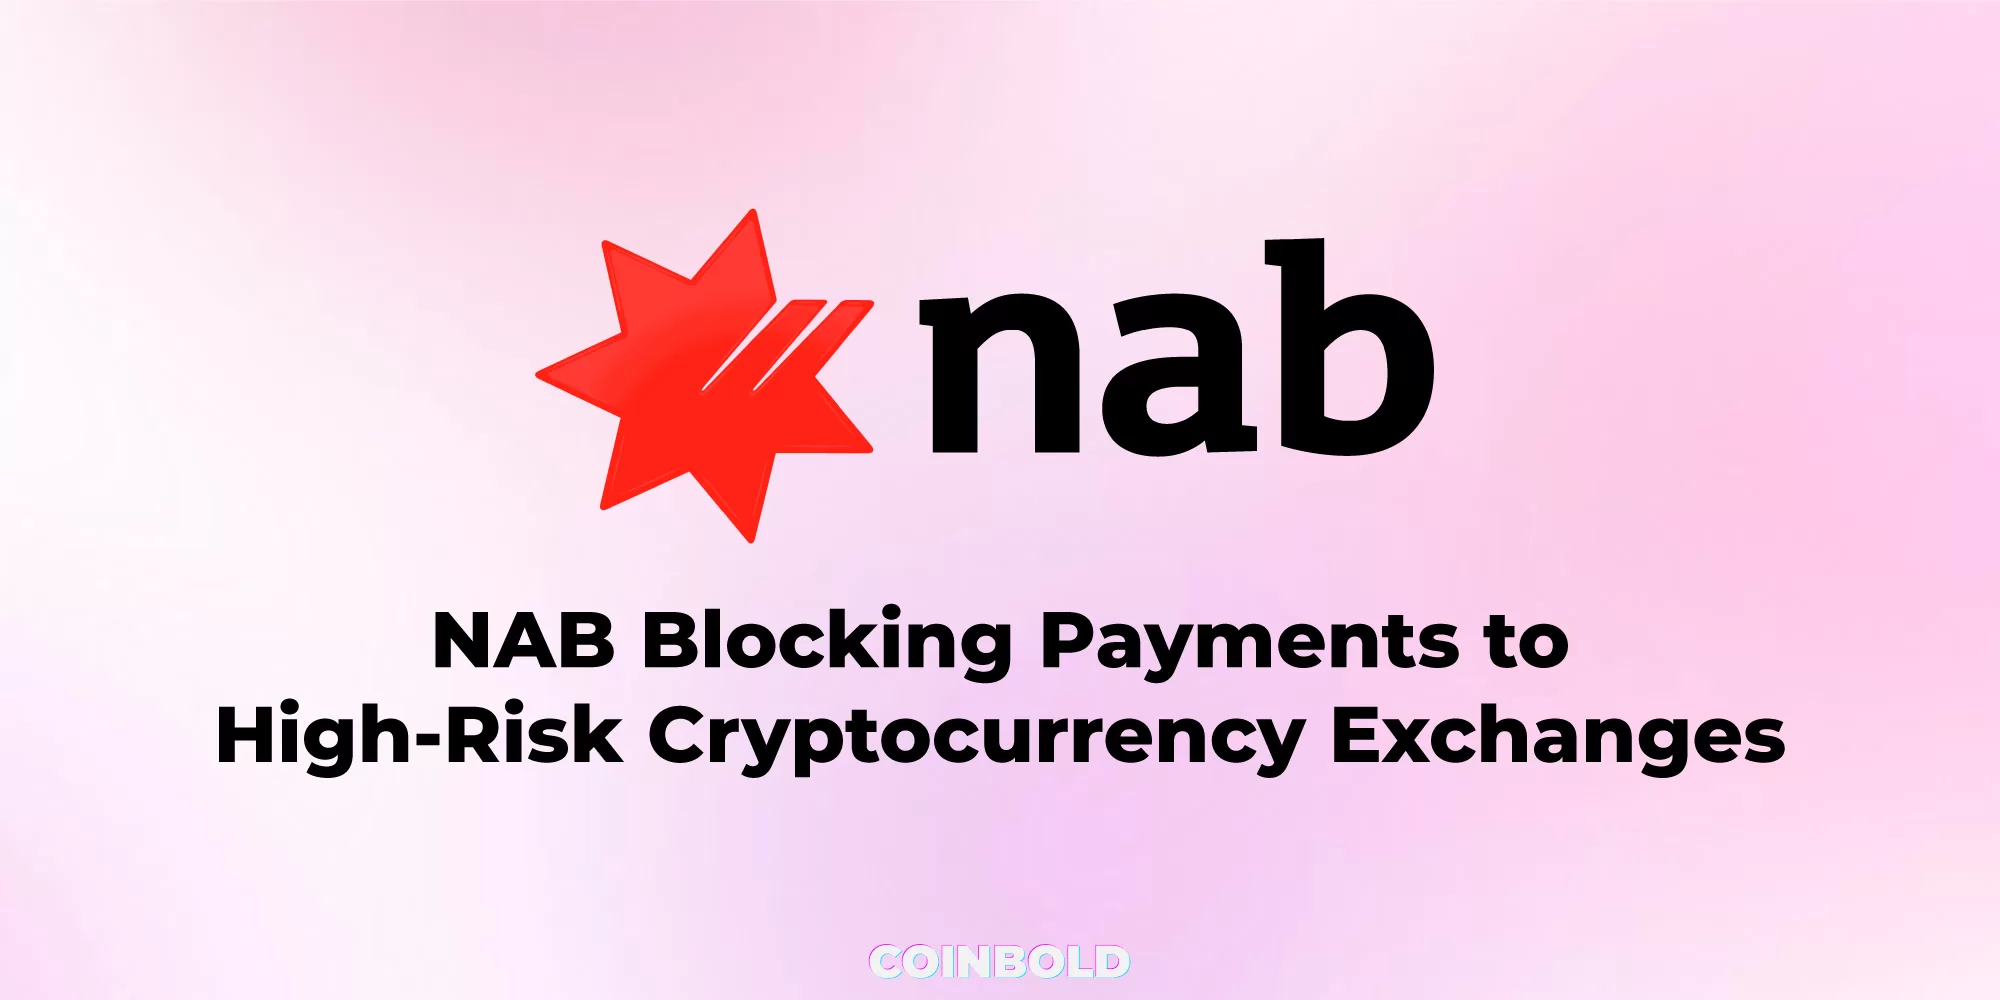 NAB Blocking Payments to High-Risk Cryptocurrency Exchanges